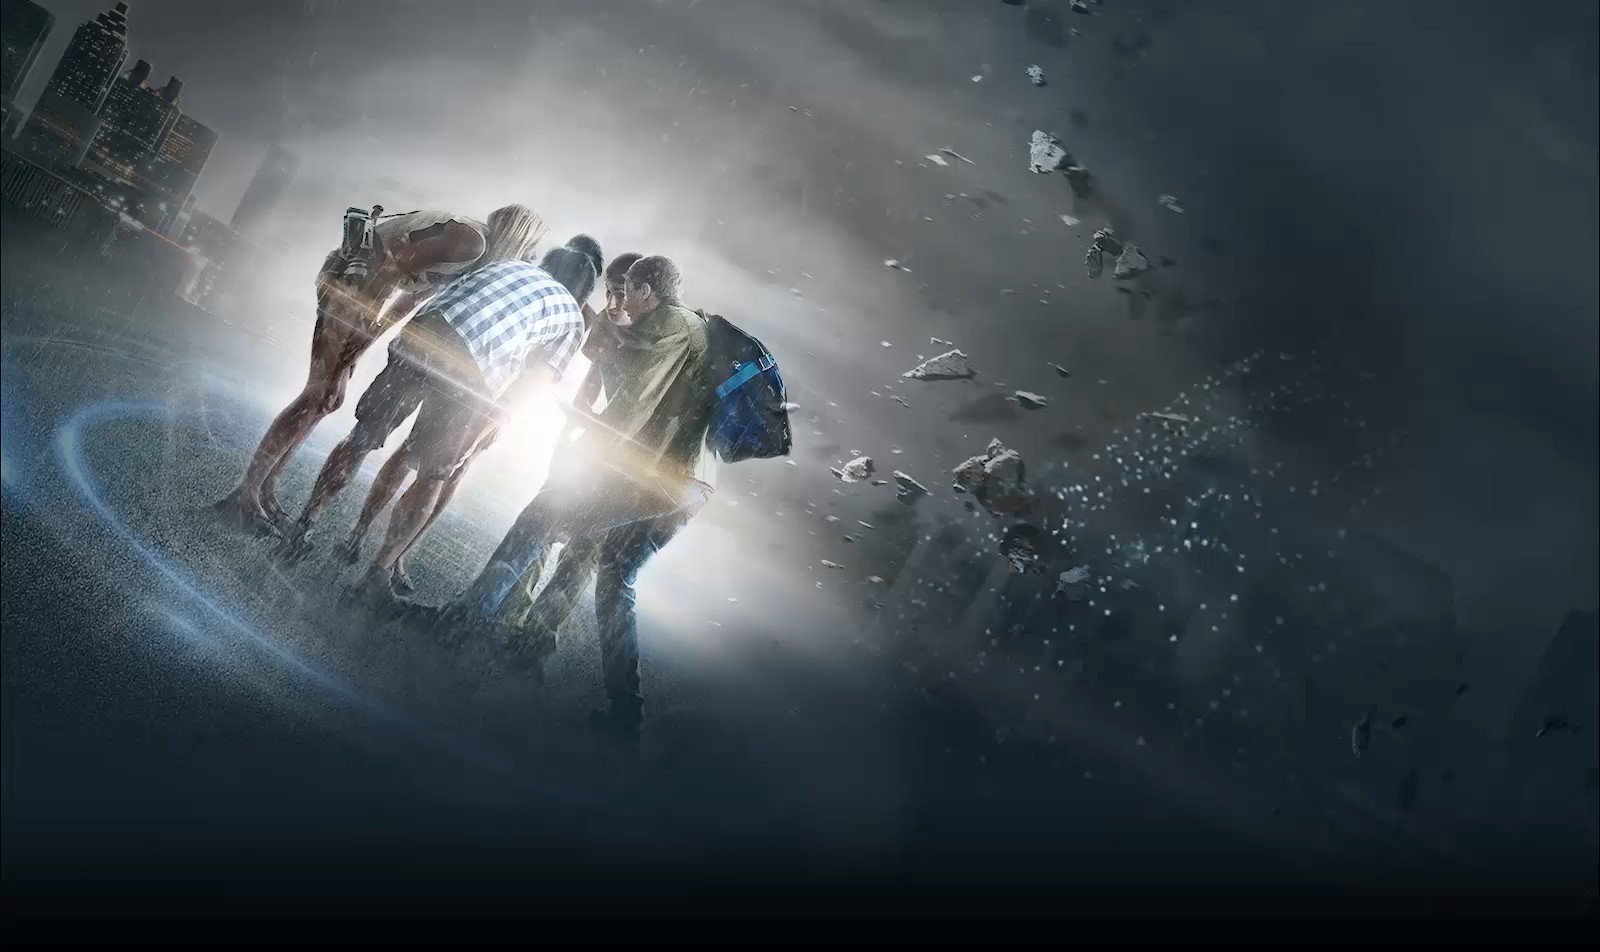 A scene from Paramount Pictures' Project Almanac (2015)